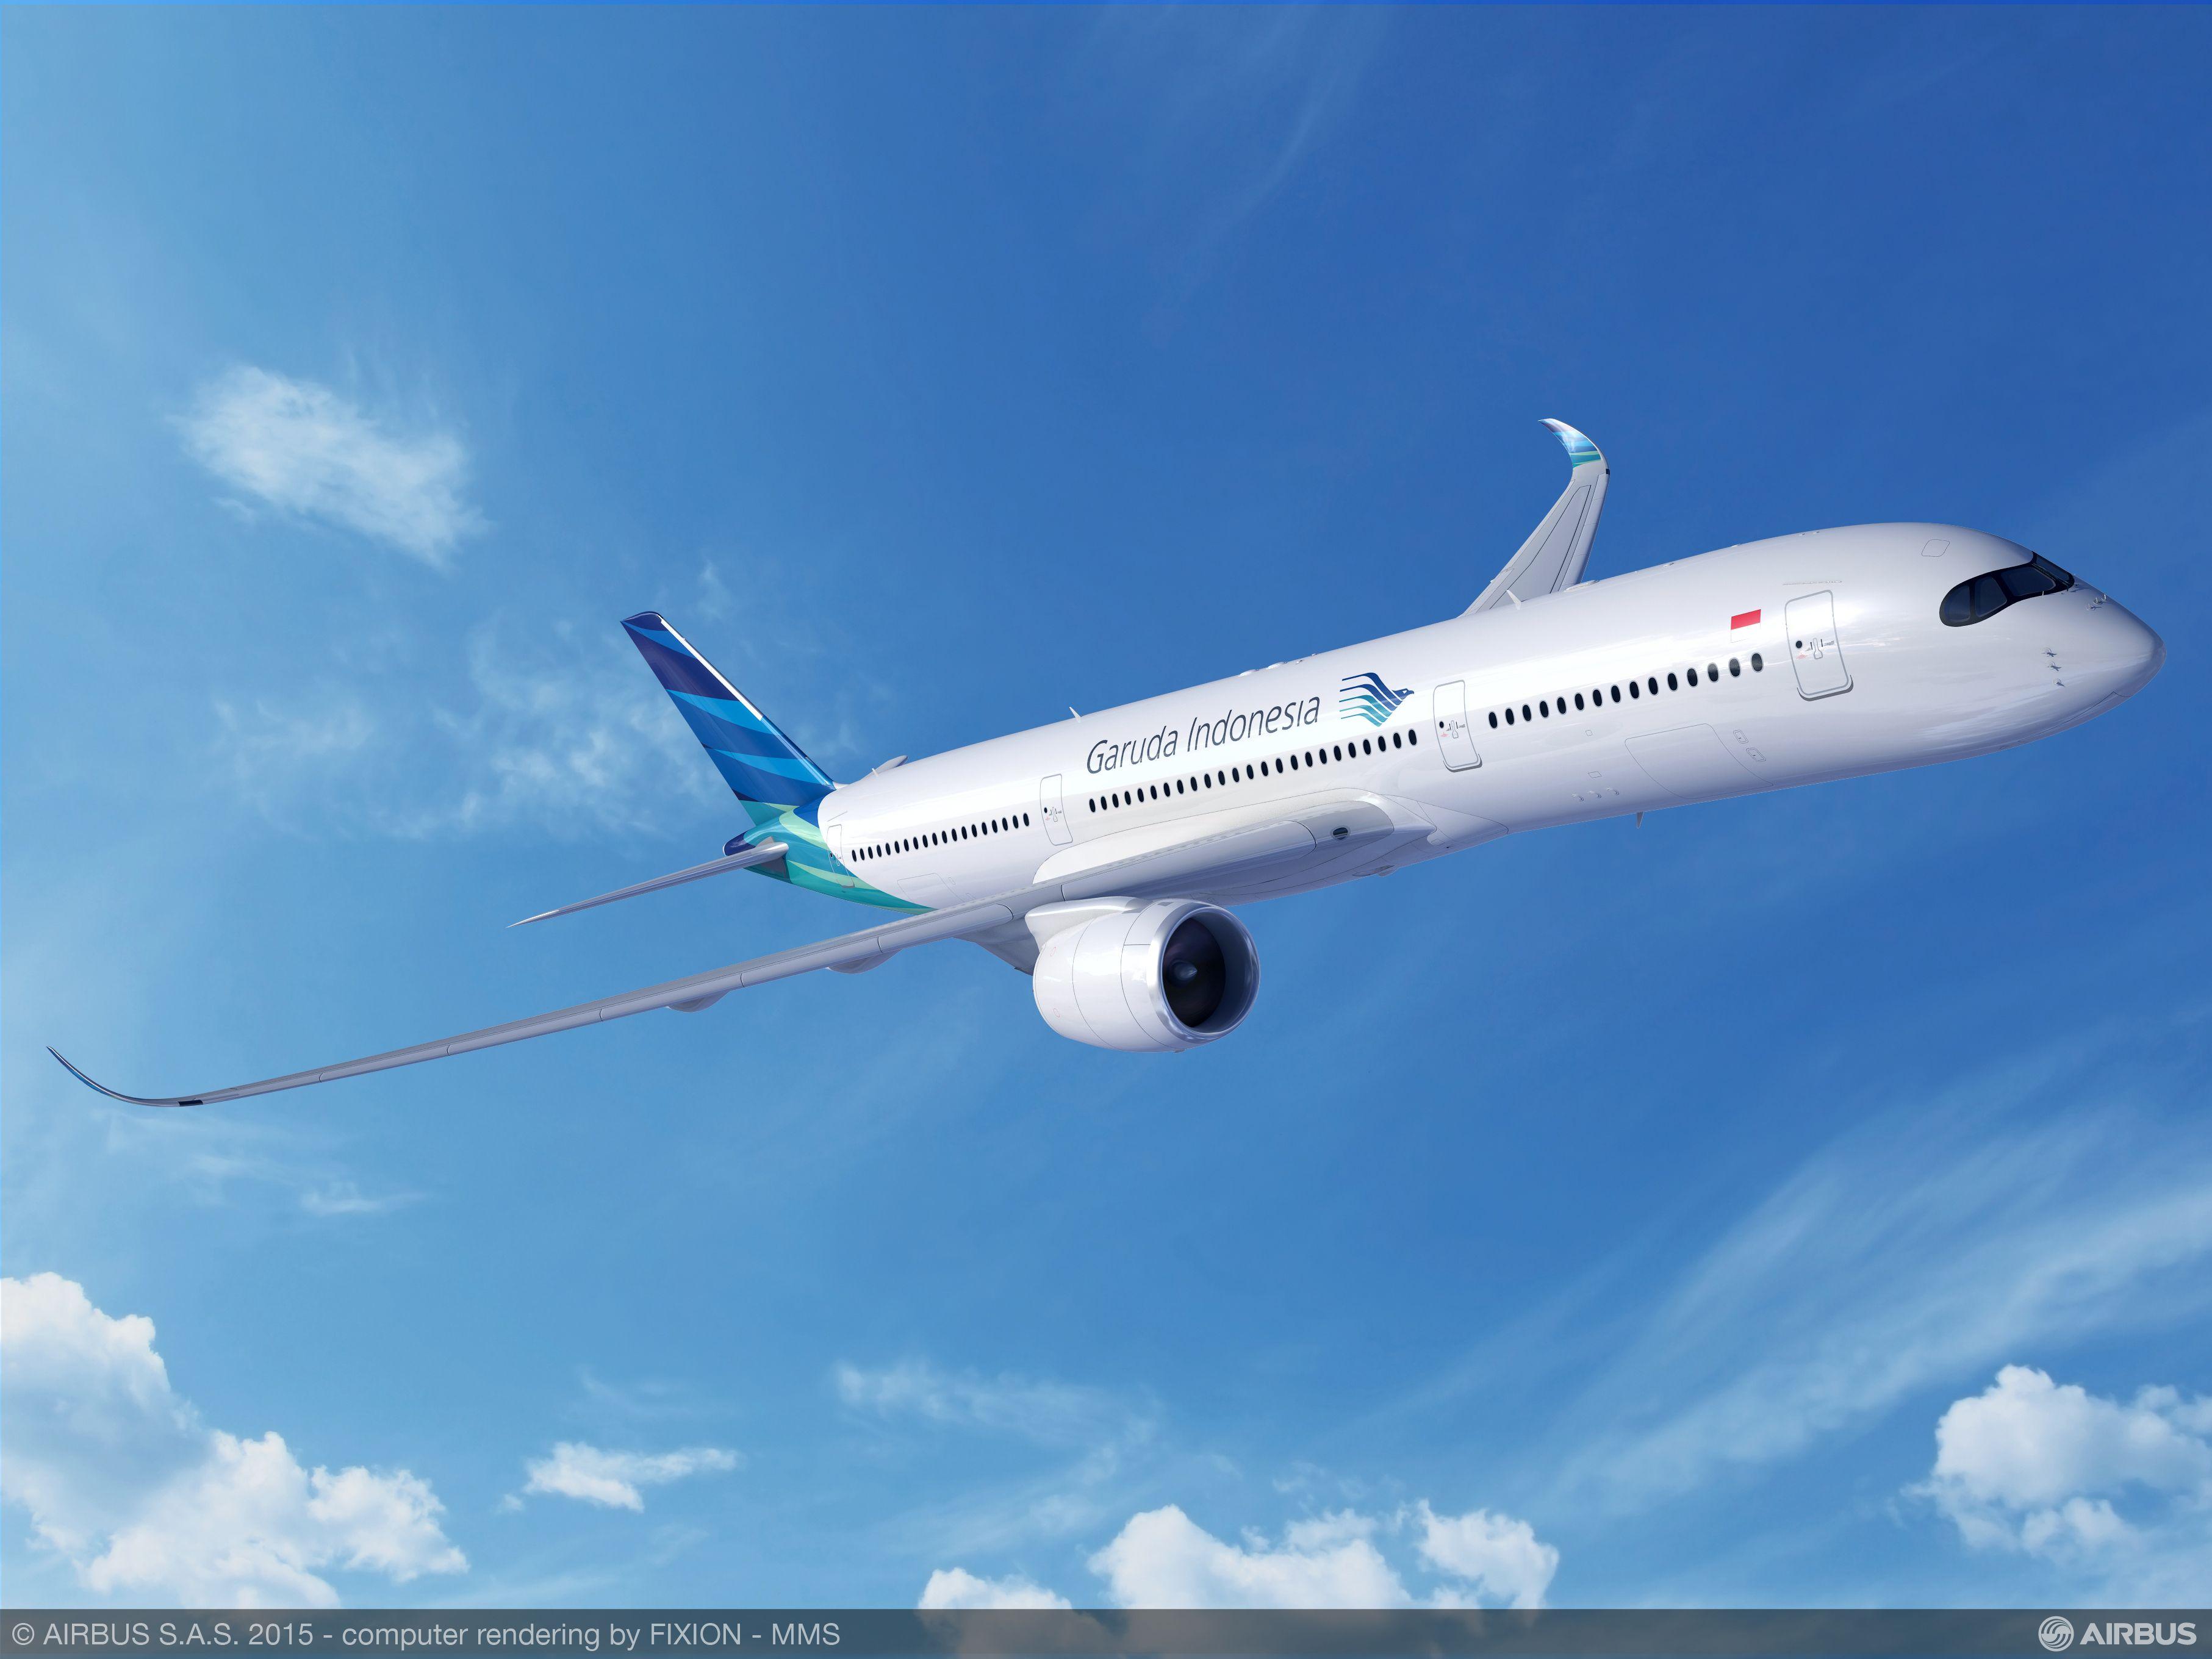 Airbus' Next Generation A350 XWB Takes Centre Stage On Day 1